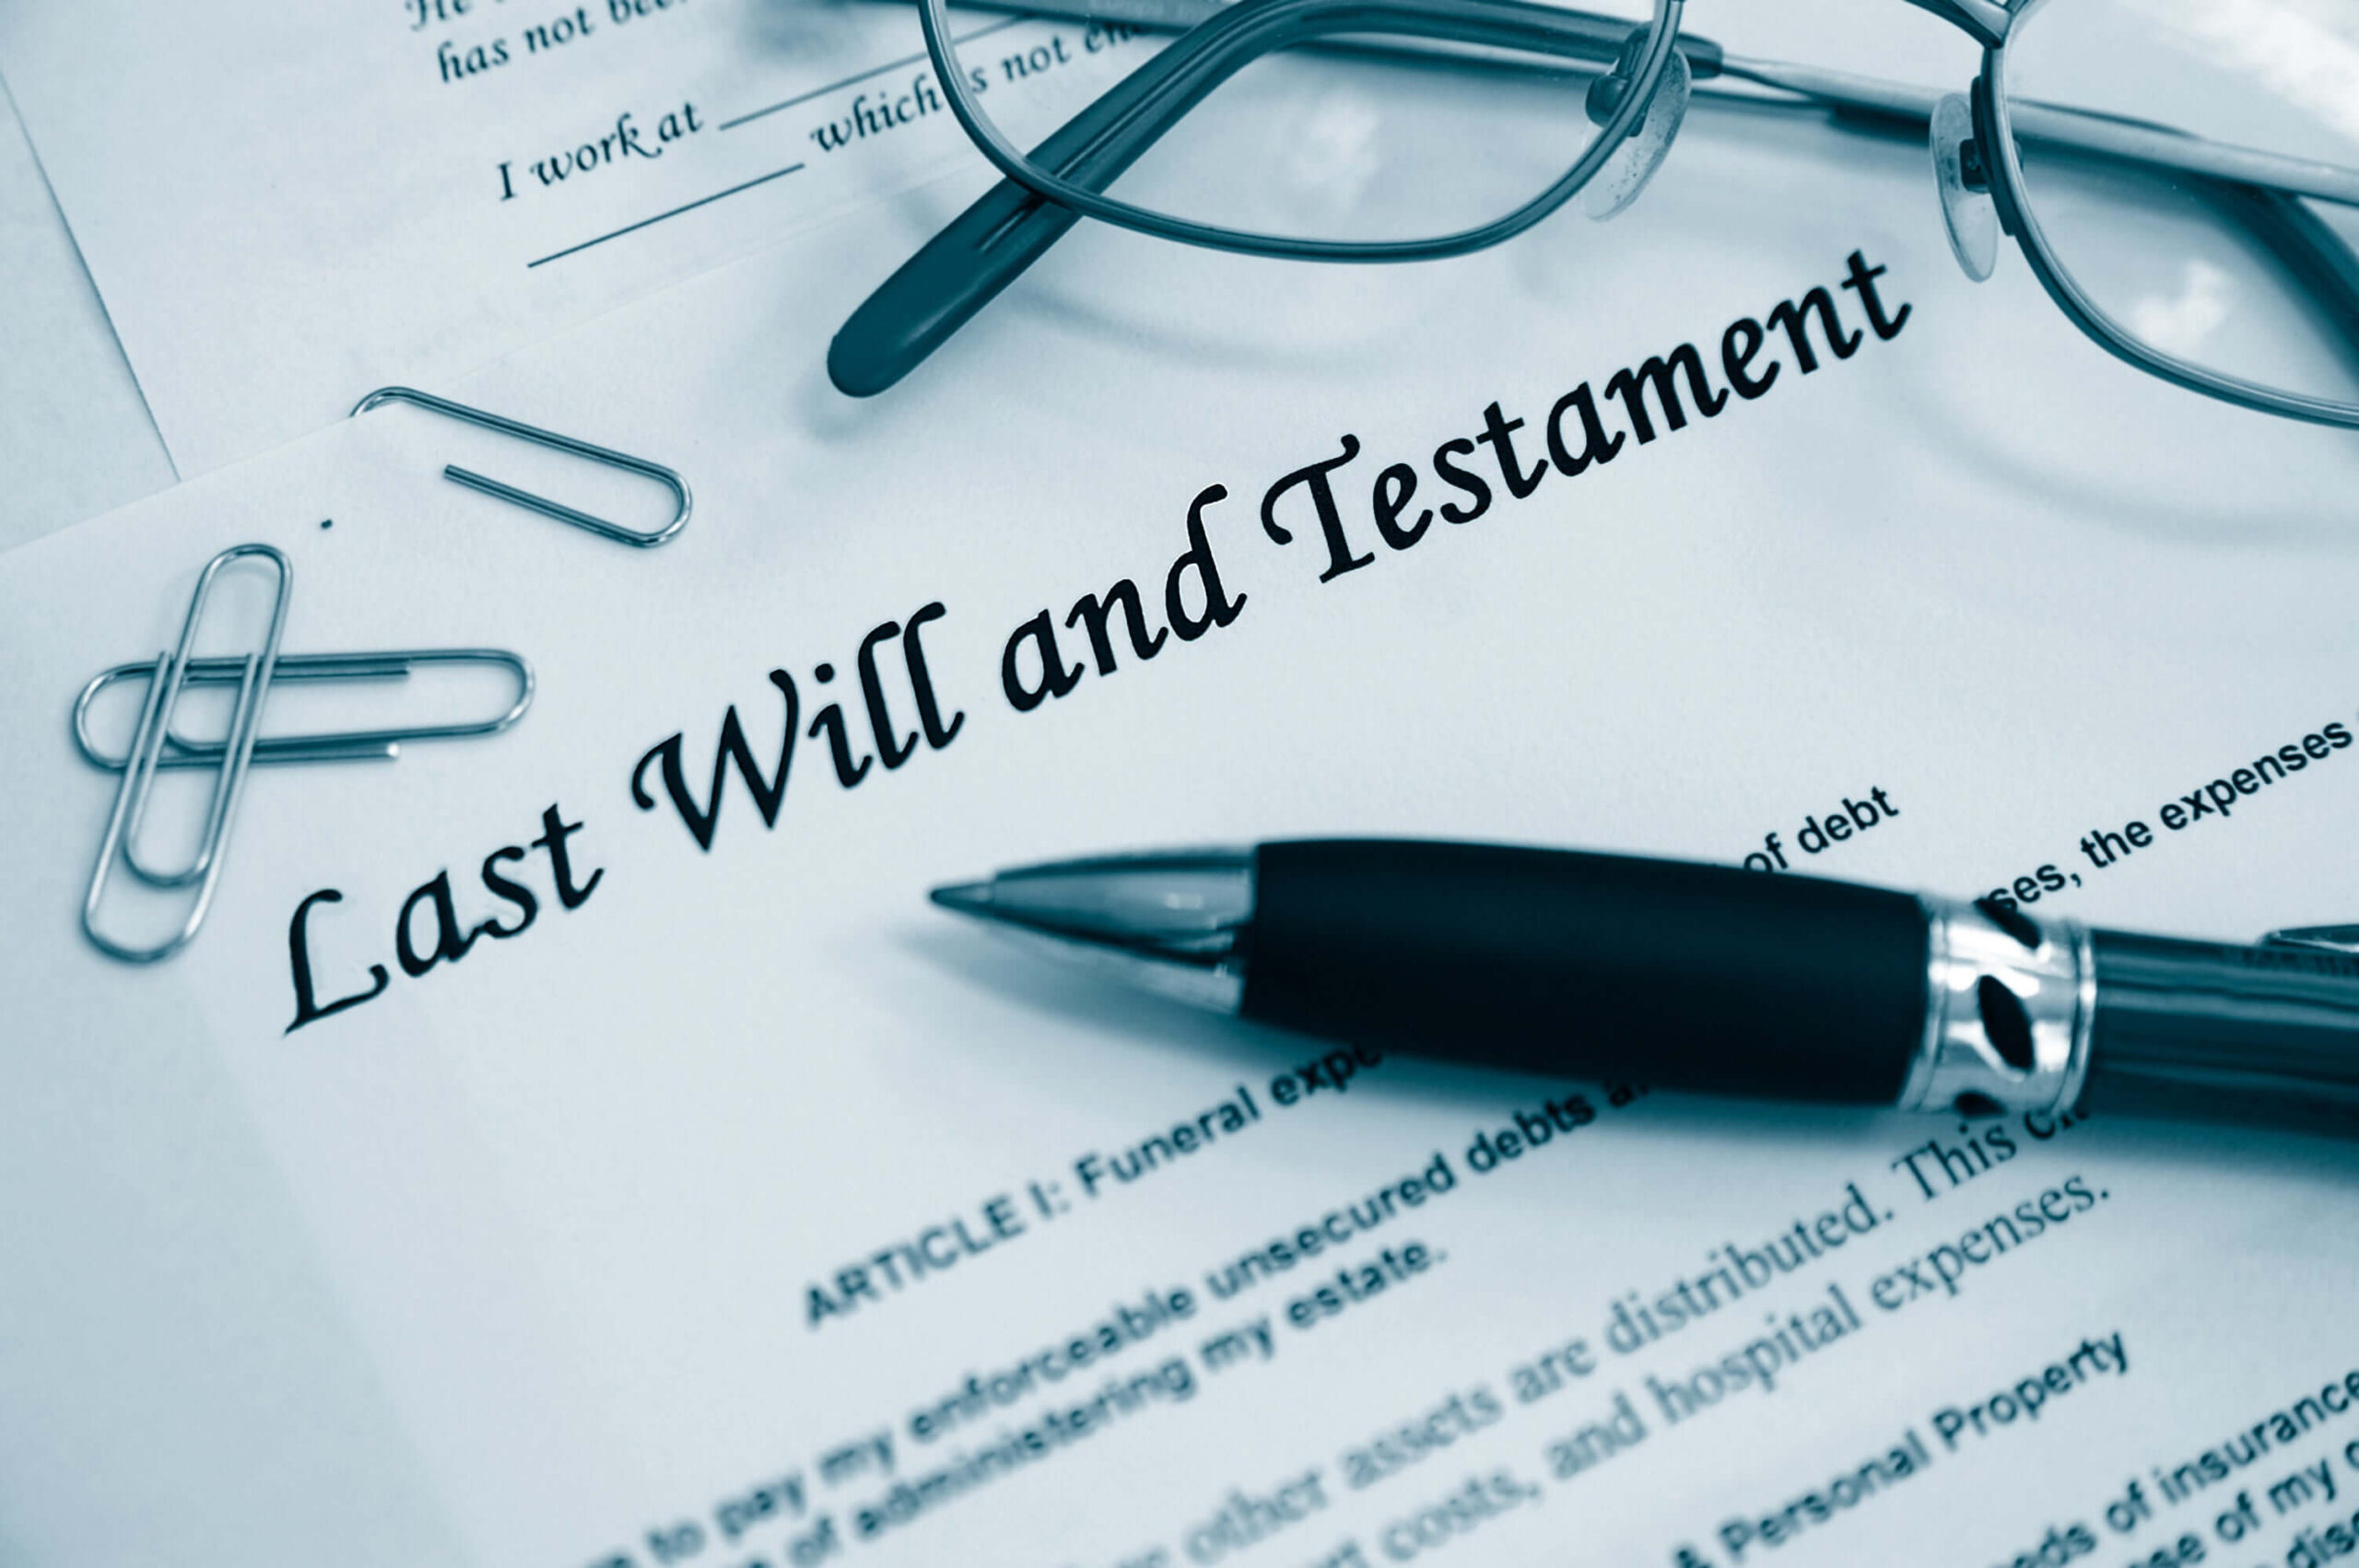 Understand why having a legal will can be advantageous